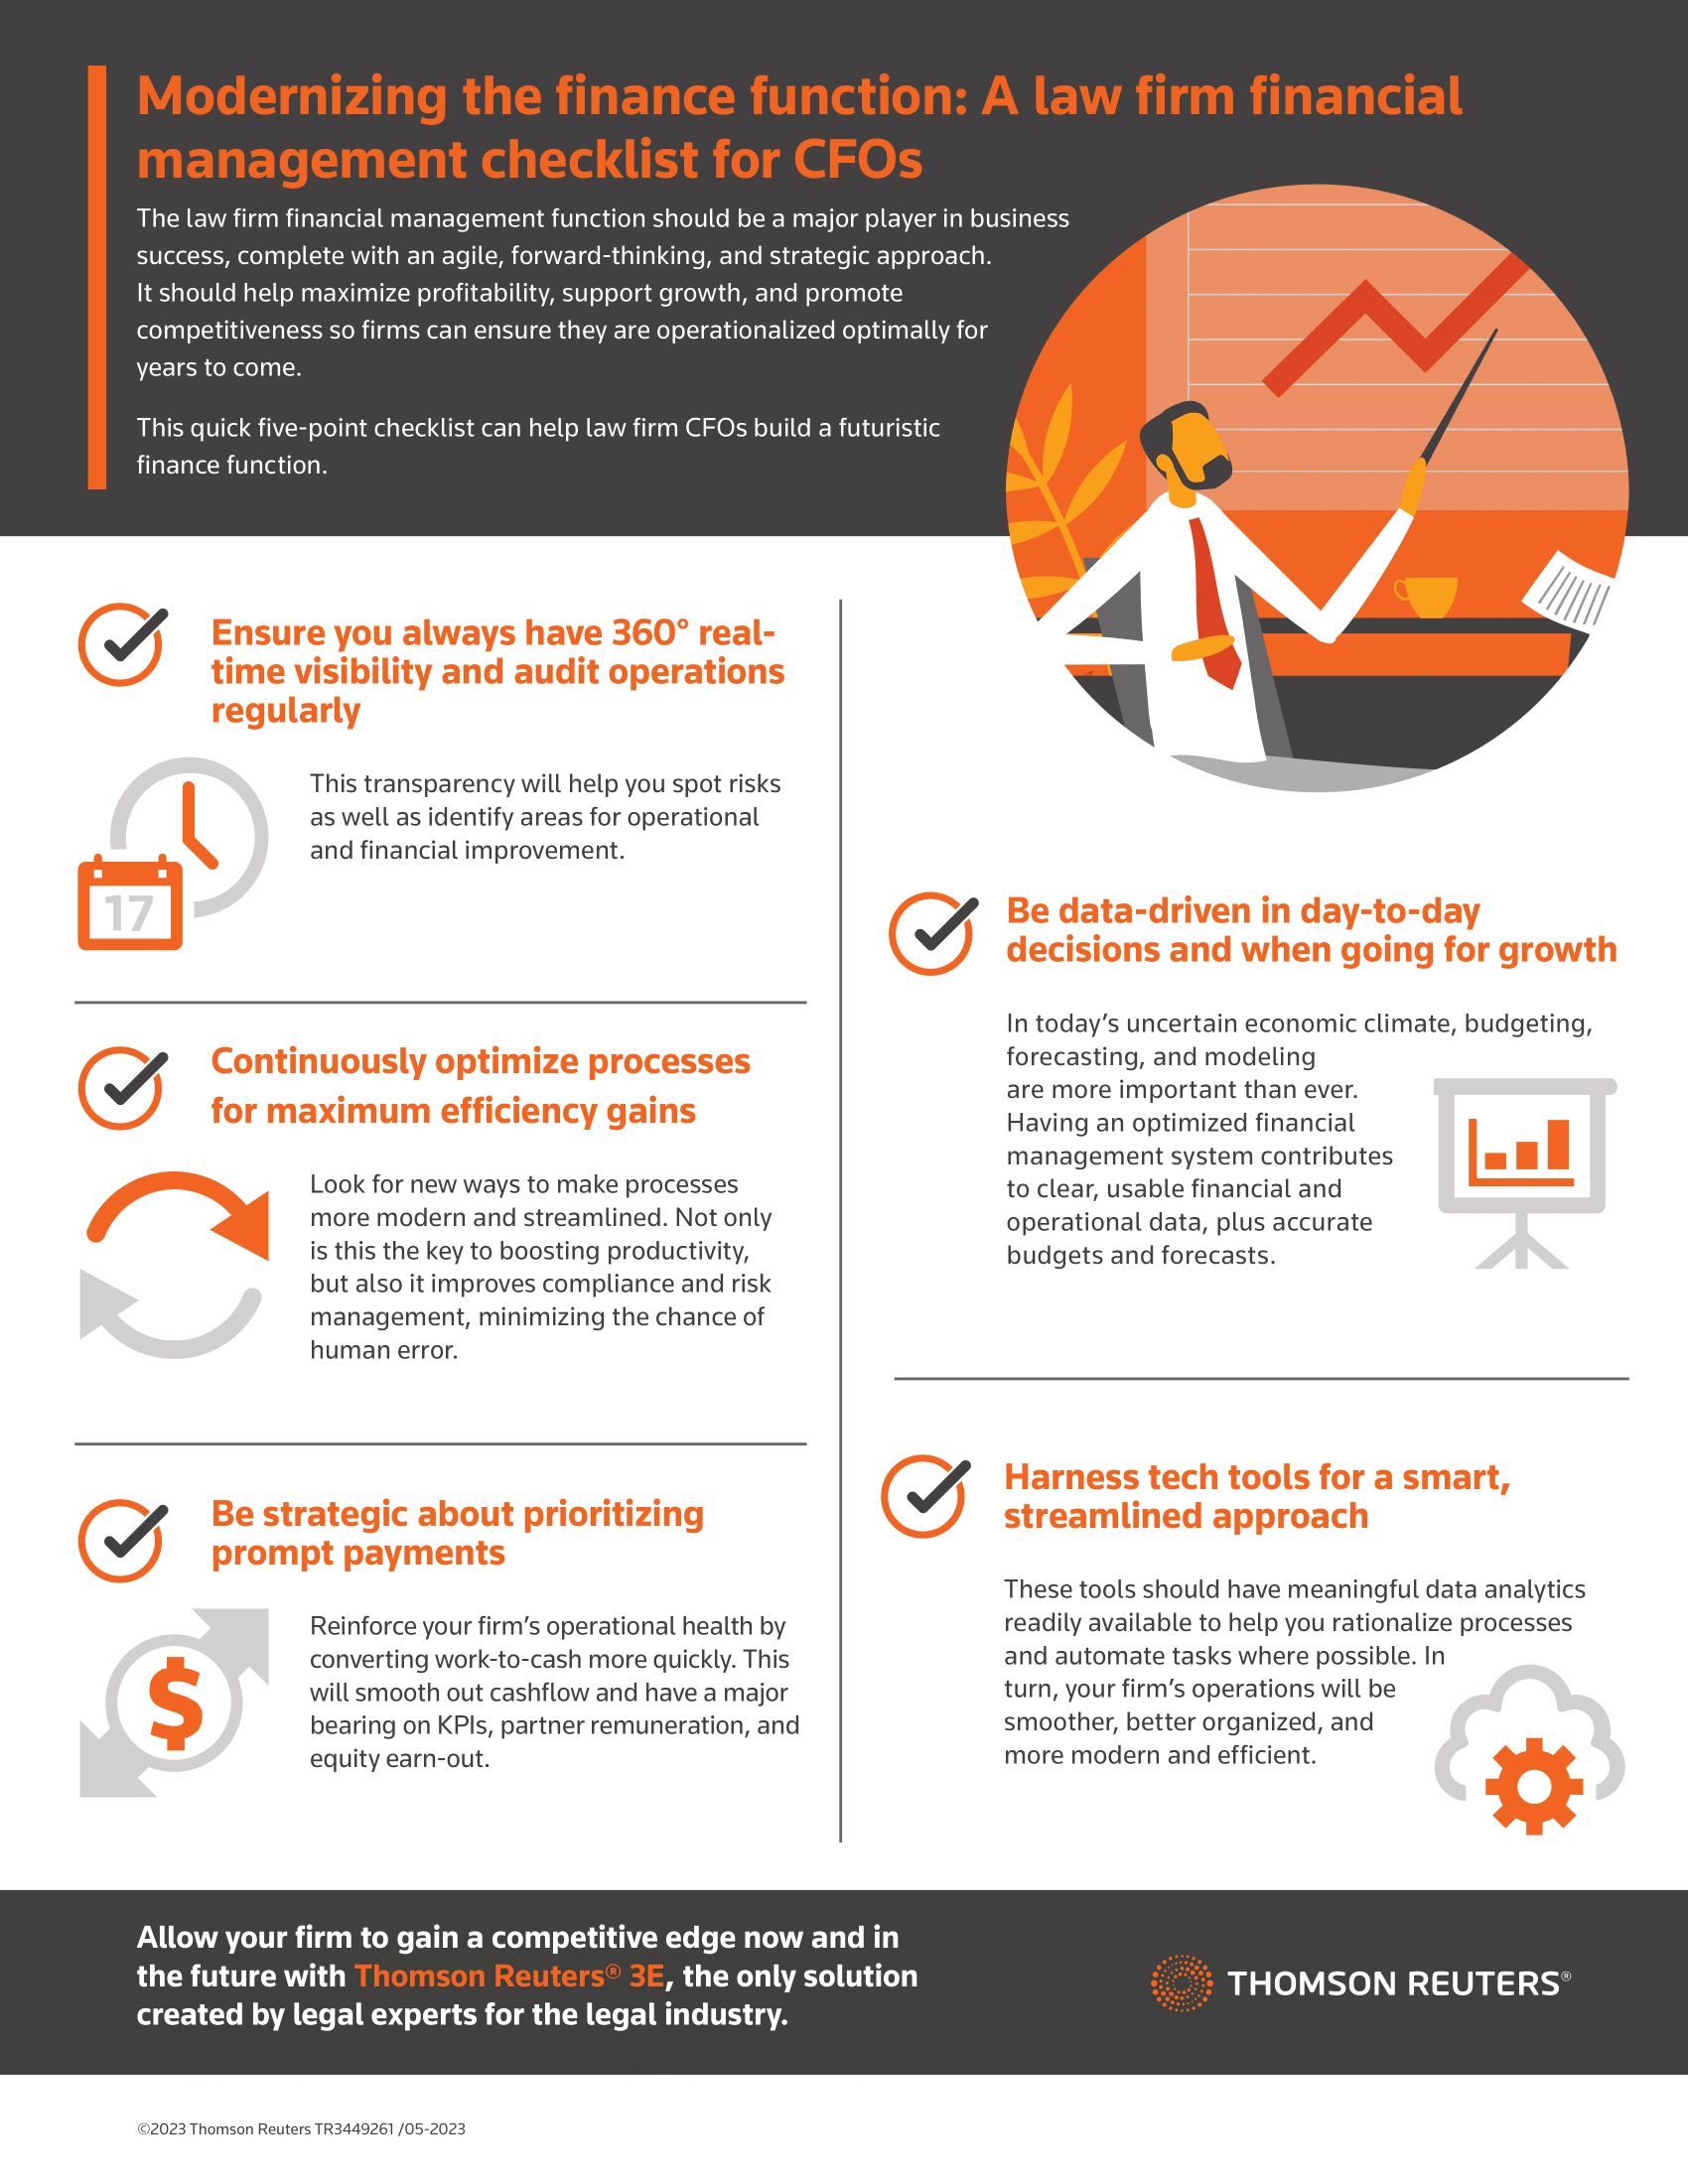 An infographic of modernizing the futuristic finance function